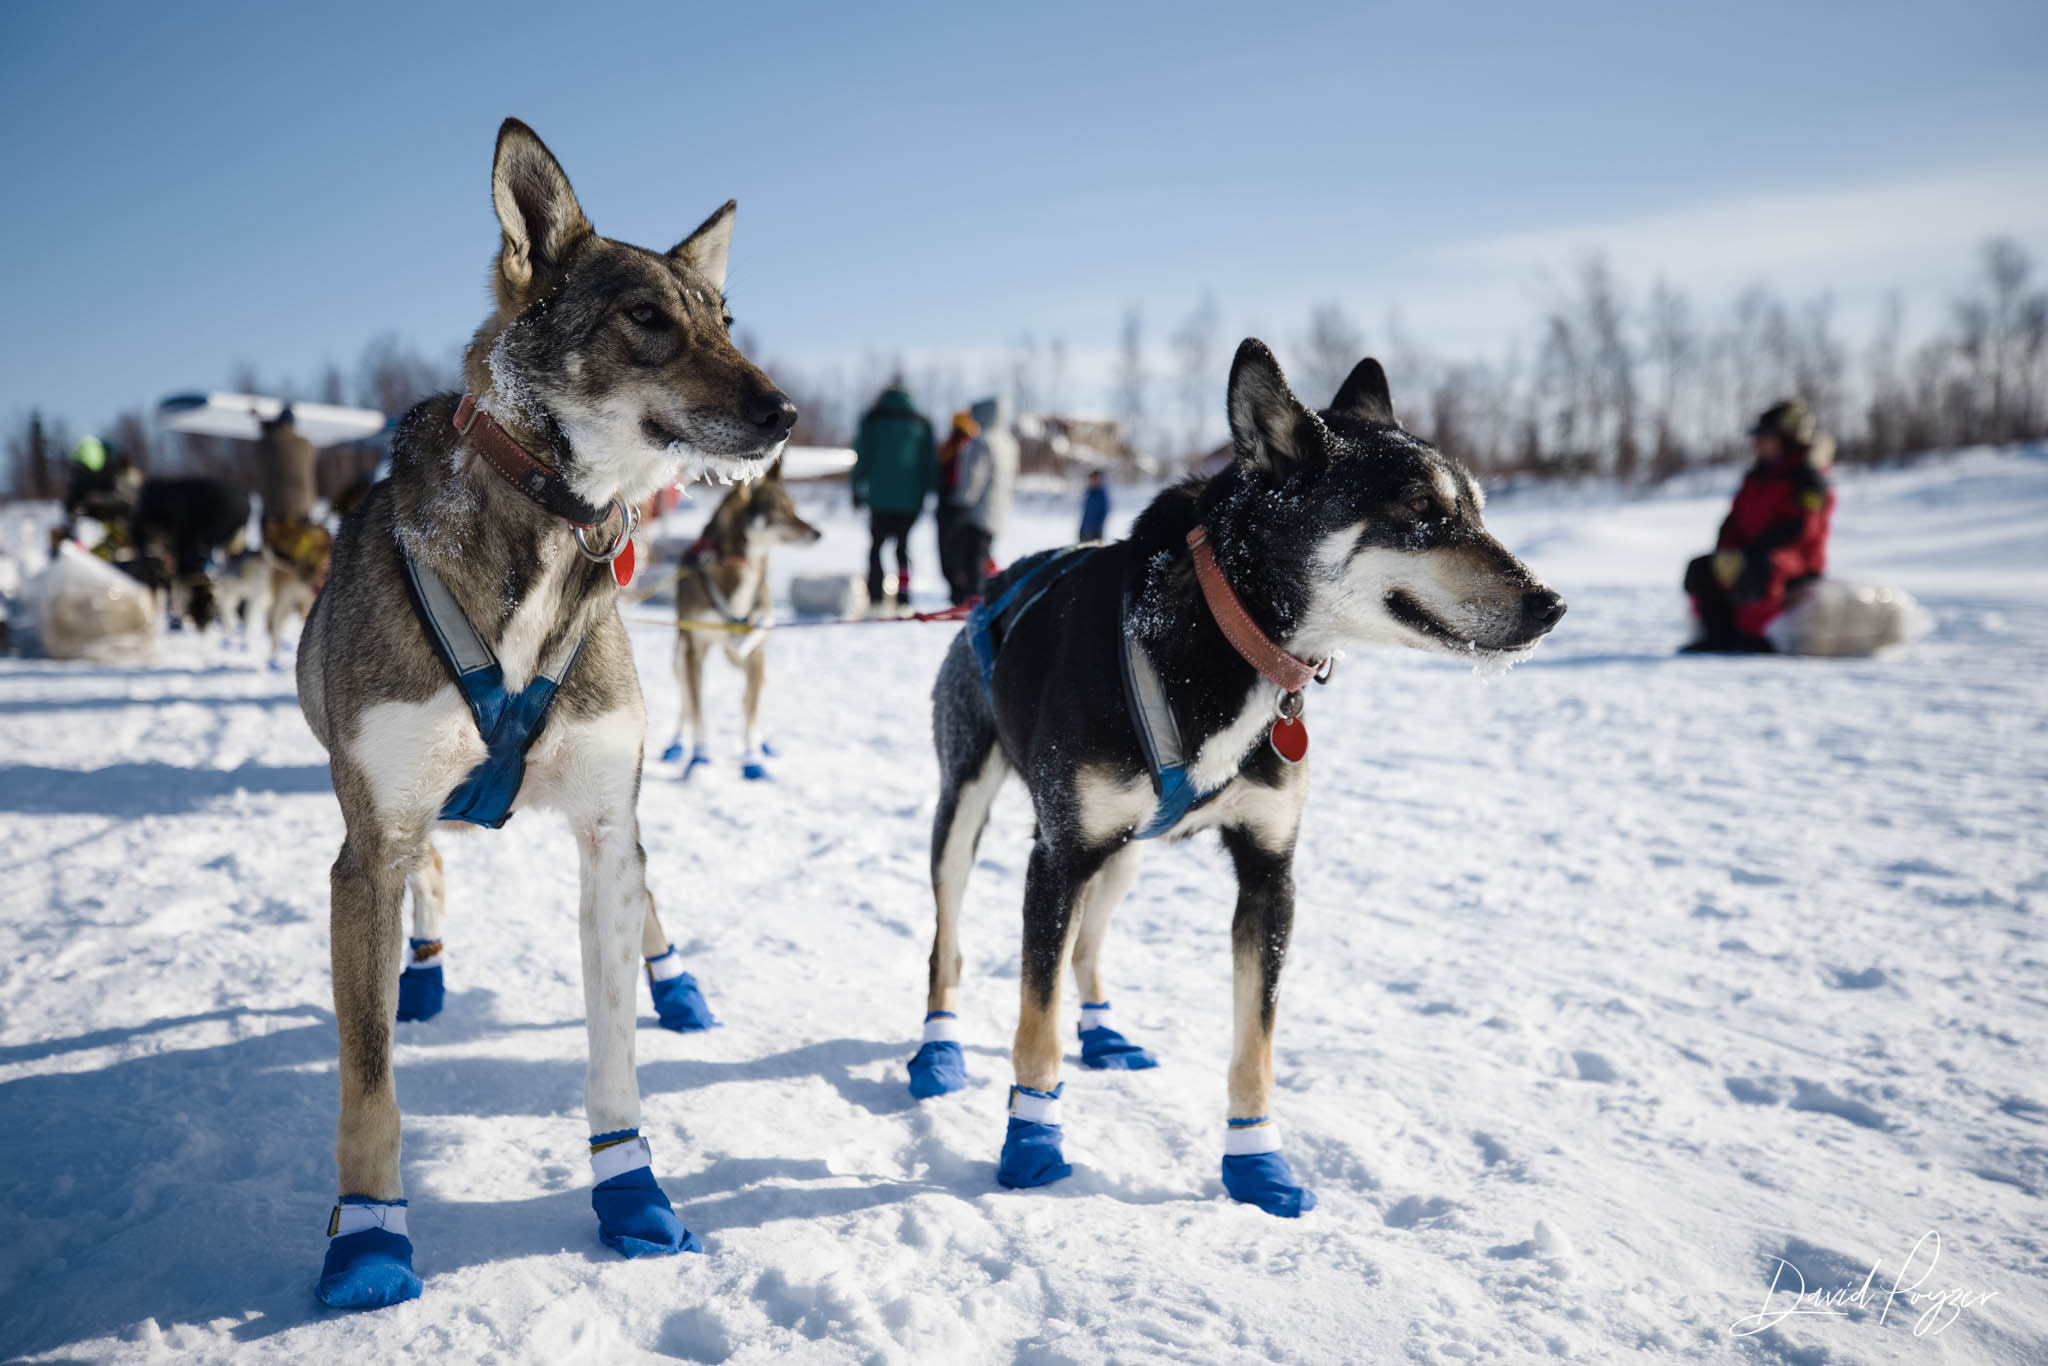 Wade's dogs at the halfway Iditarod checkpoint.